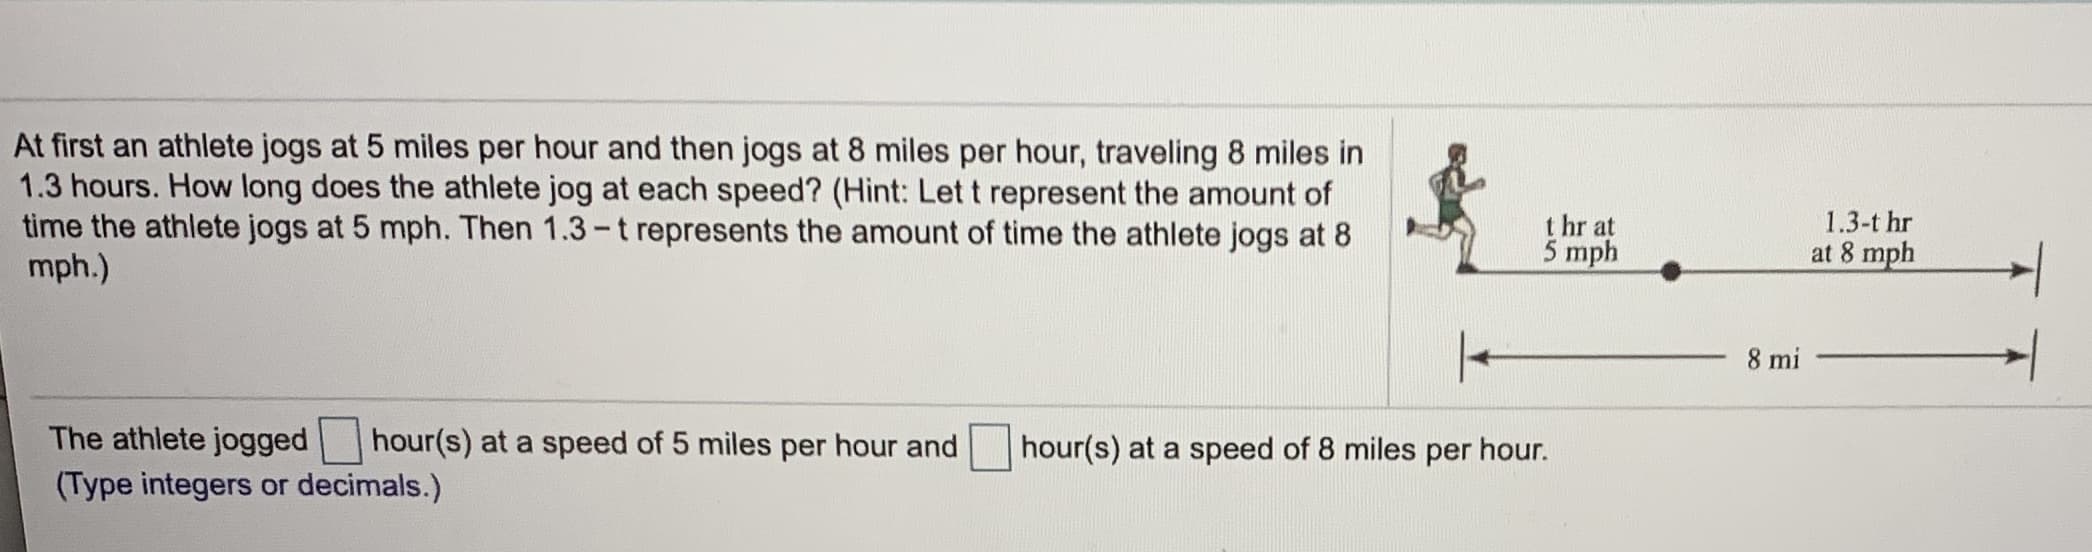 At first an athlete jogs at 5 miles per hour and then jogs at 8 miles per hour, traveling 8 miles in
1.3 hours. How long does the athlete jog at each speed? (Hint: Let t represent the amount of
time the athlete jogs at 5 mph. Then 1.3-t represents the amount of time the athlete jogs at 8
mph.)
1.3-t hr
t hr at
5 mph
at 8 mph
8 mi
The athlete jogged
hour(s) at a speed of 5 miles per hour and
hour(s) at a speed of 8 miles per hour.
(Type integers or decimals.)
